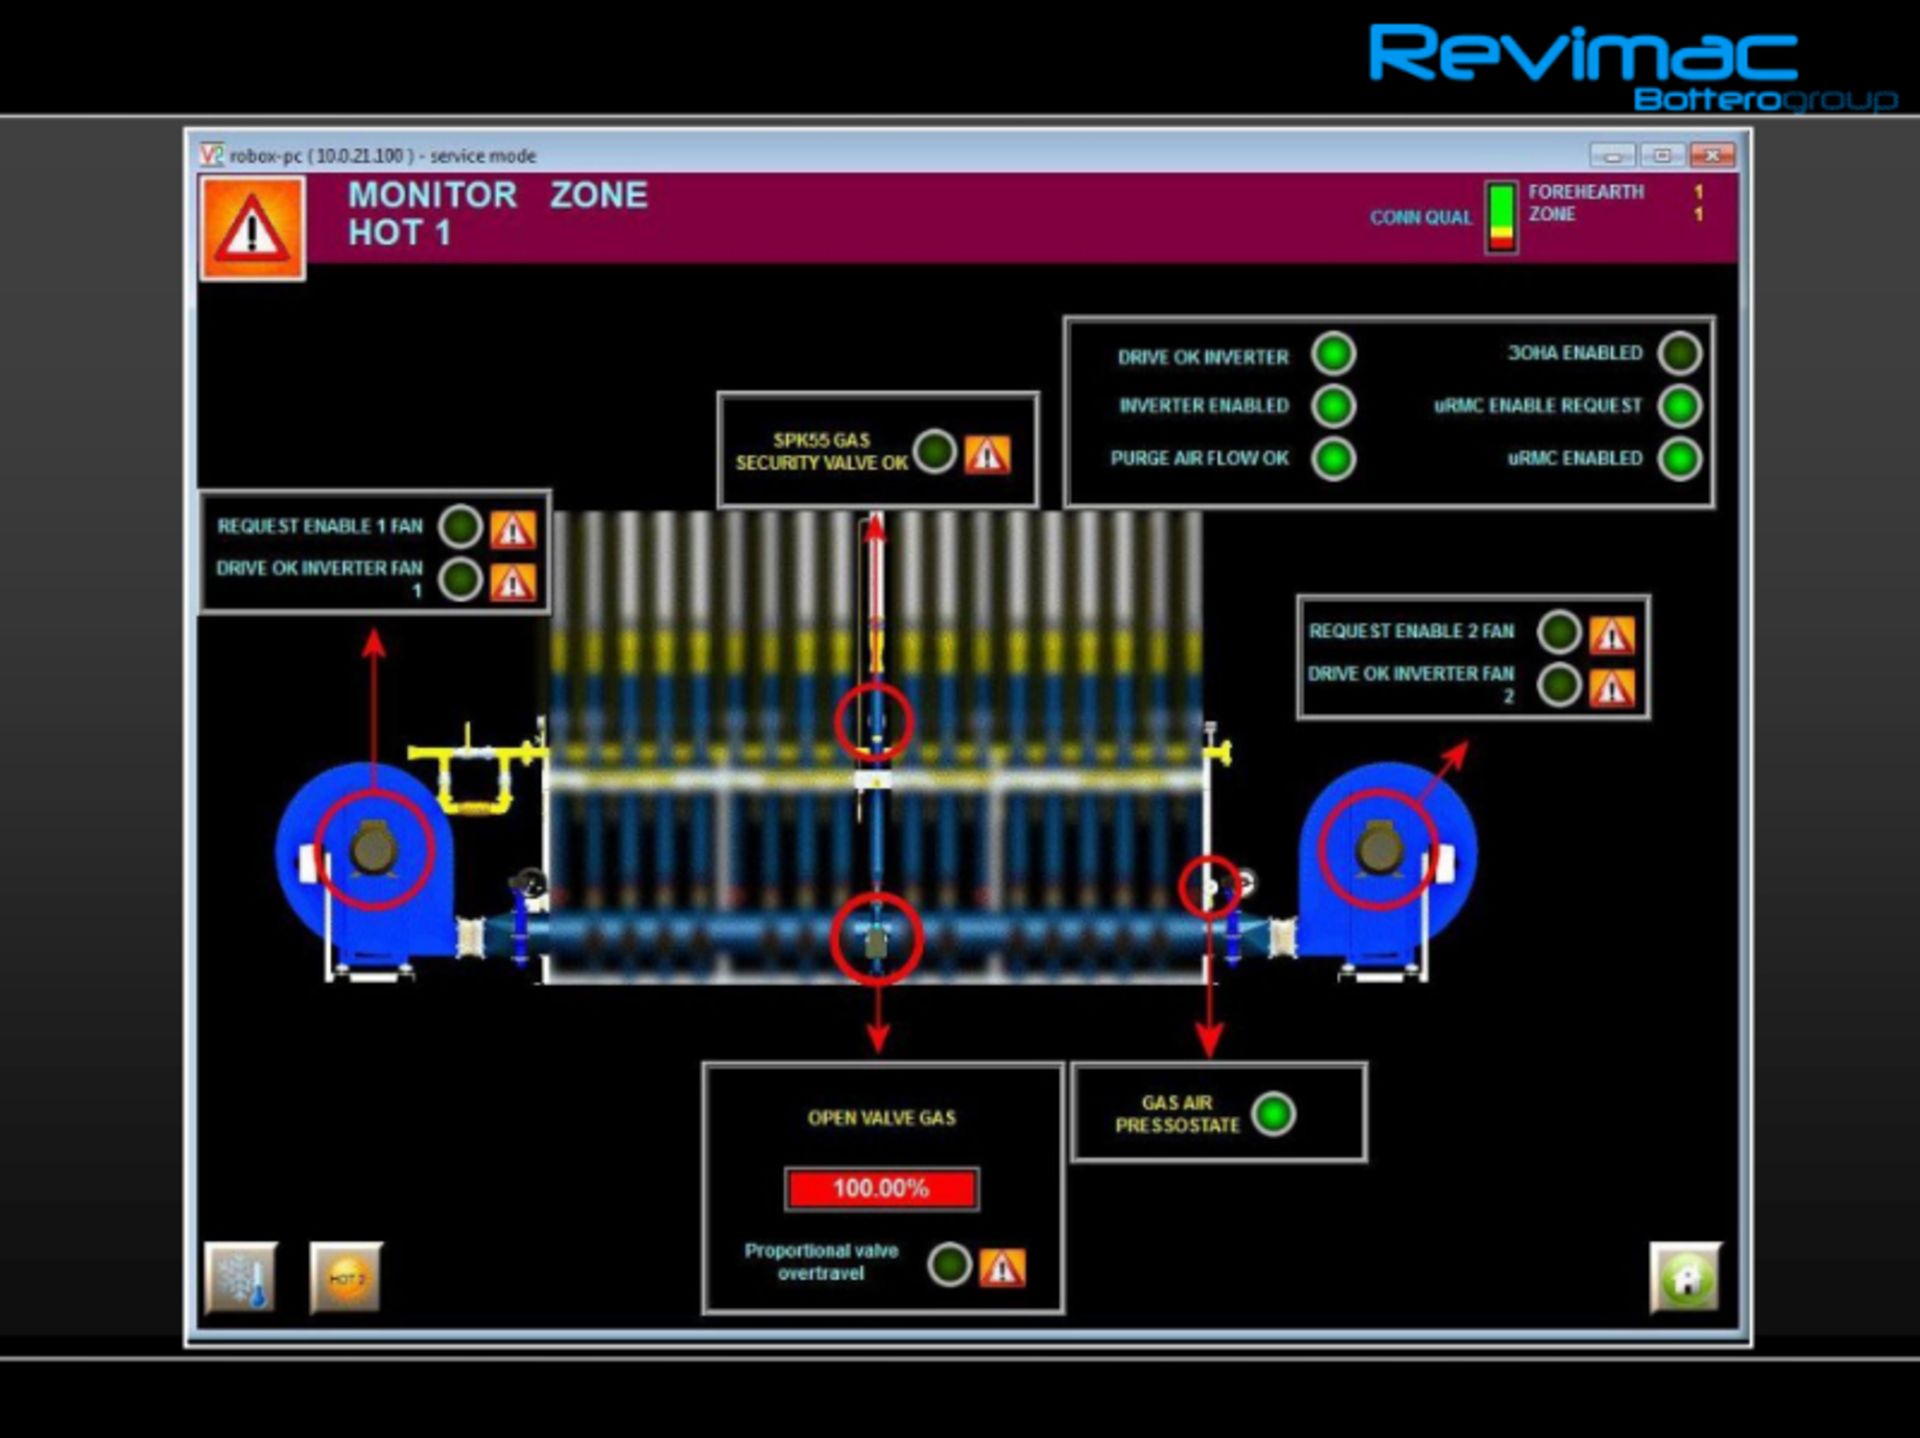 Revimac Forehearth Control System *Subject to Confirmation* - Image 9 of 18